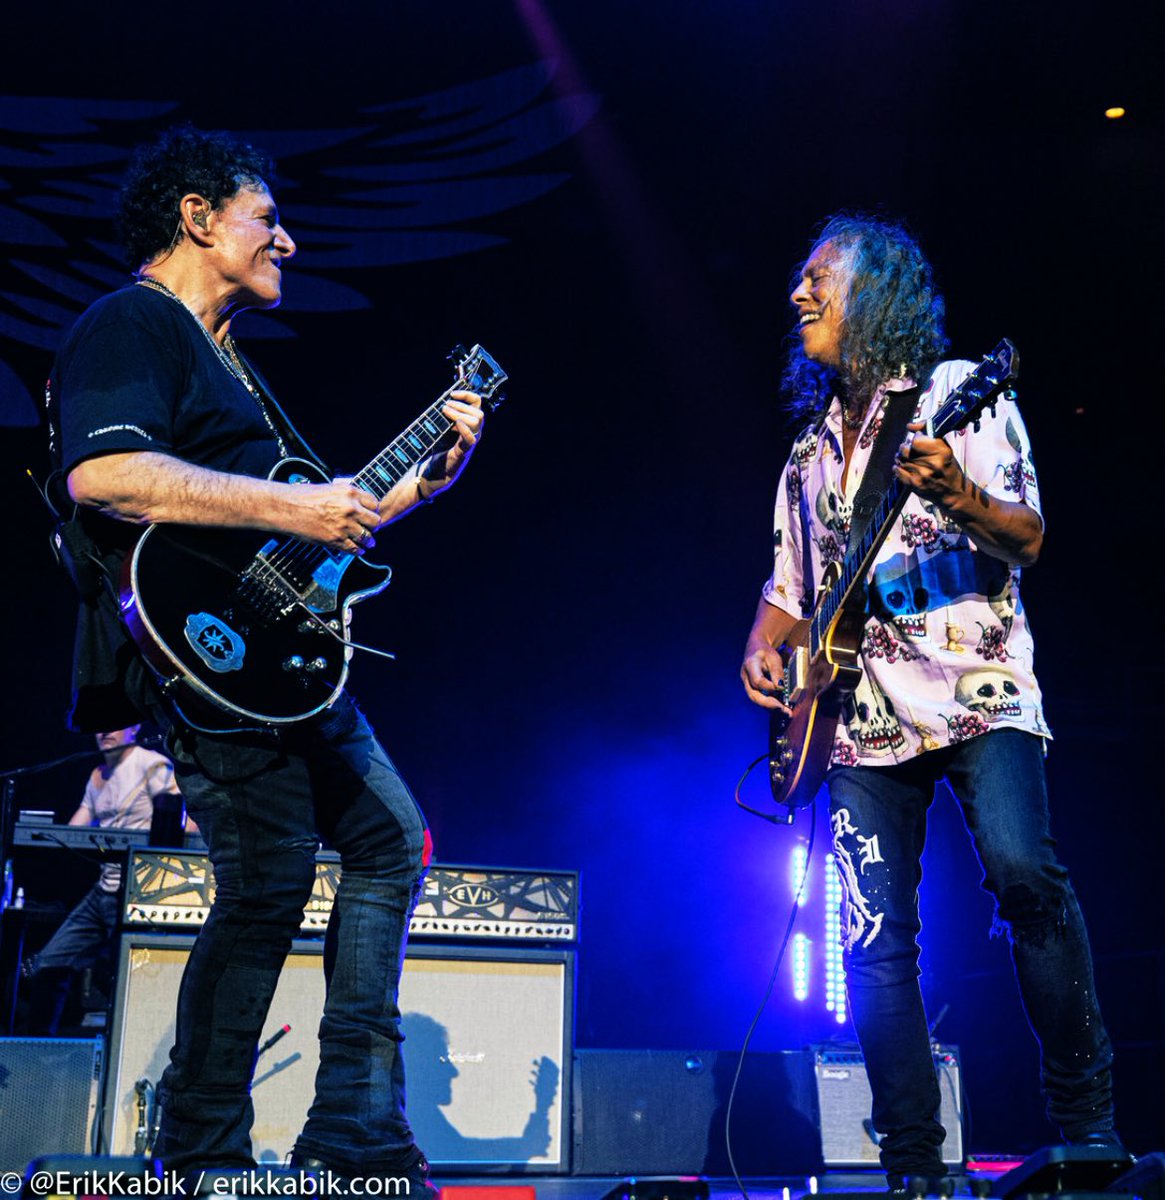 Had a great time with Kirk Hammett of @Metallica last night at 2nd Sold Out @JourneyOfficial show in Hawaii Neal blaisdell Center Honolulu I put together a jam today for Wheel w/ Enter Sandman 🤙🏽@erikkabik pic